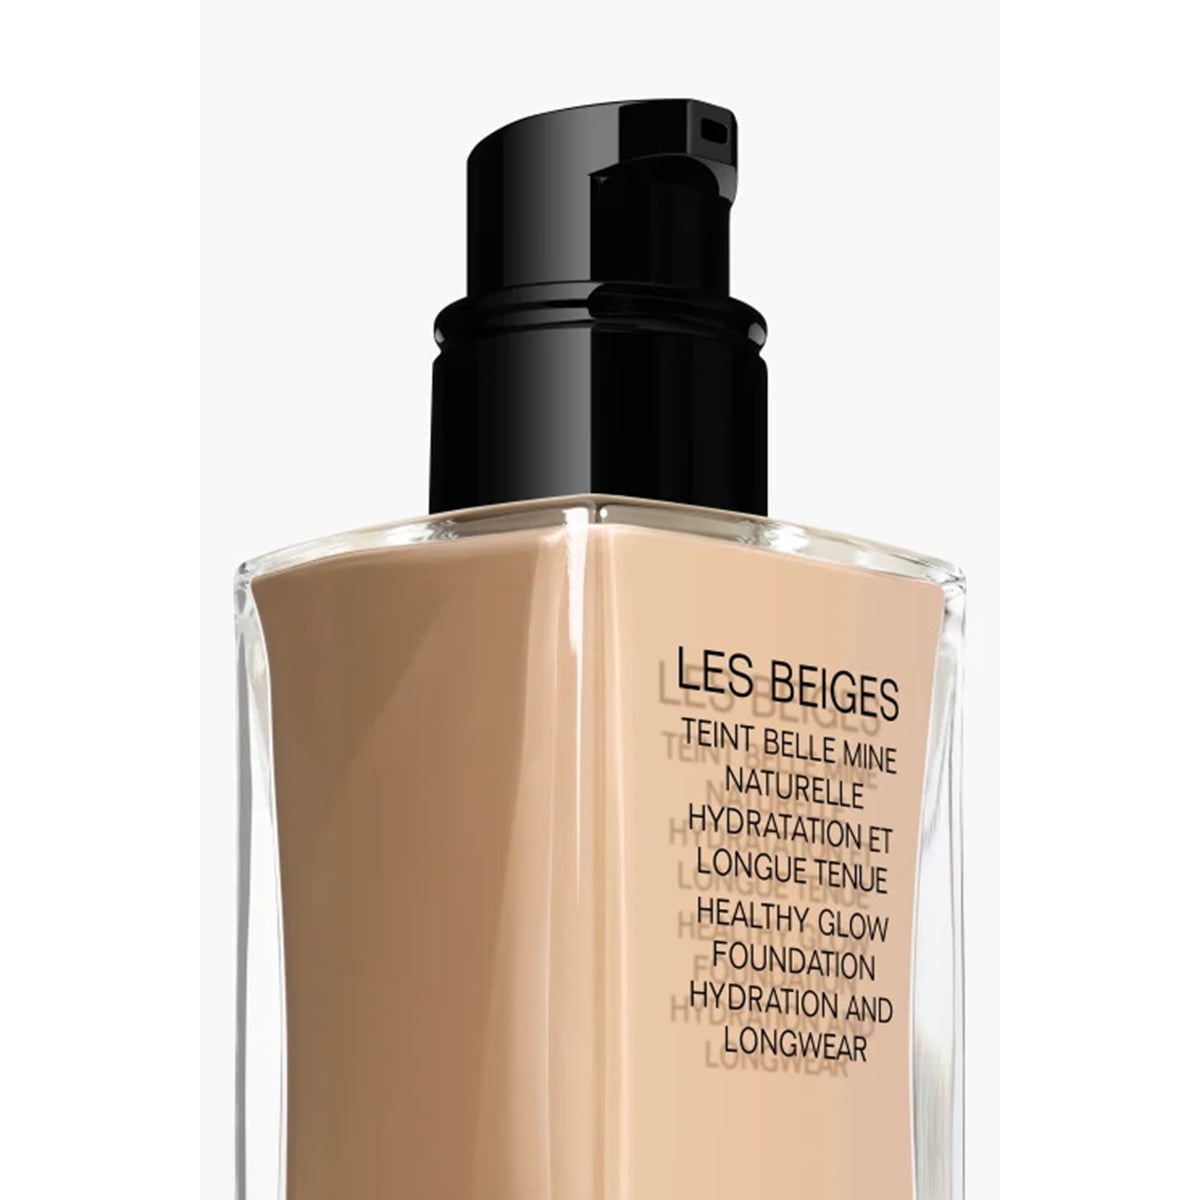 Les Beiges Healthy Glow Foundation SPF 25 - No. 22 Rose by Chanel for Women  - 1 oz Foundation